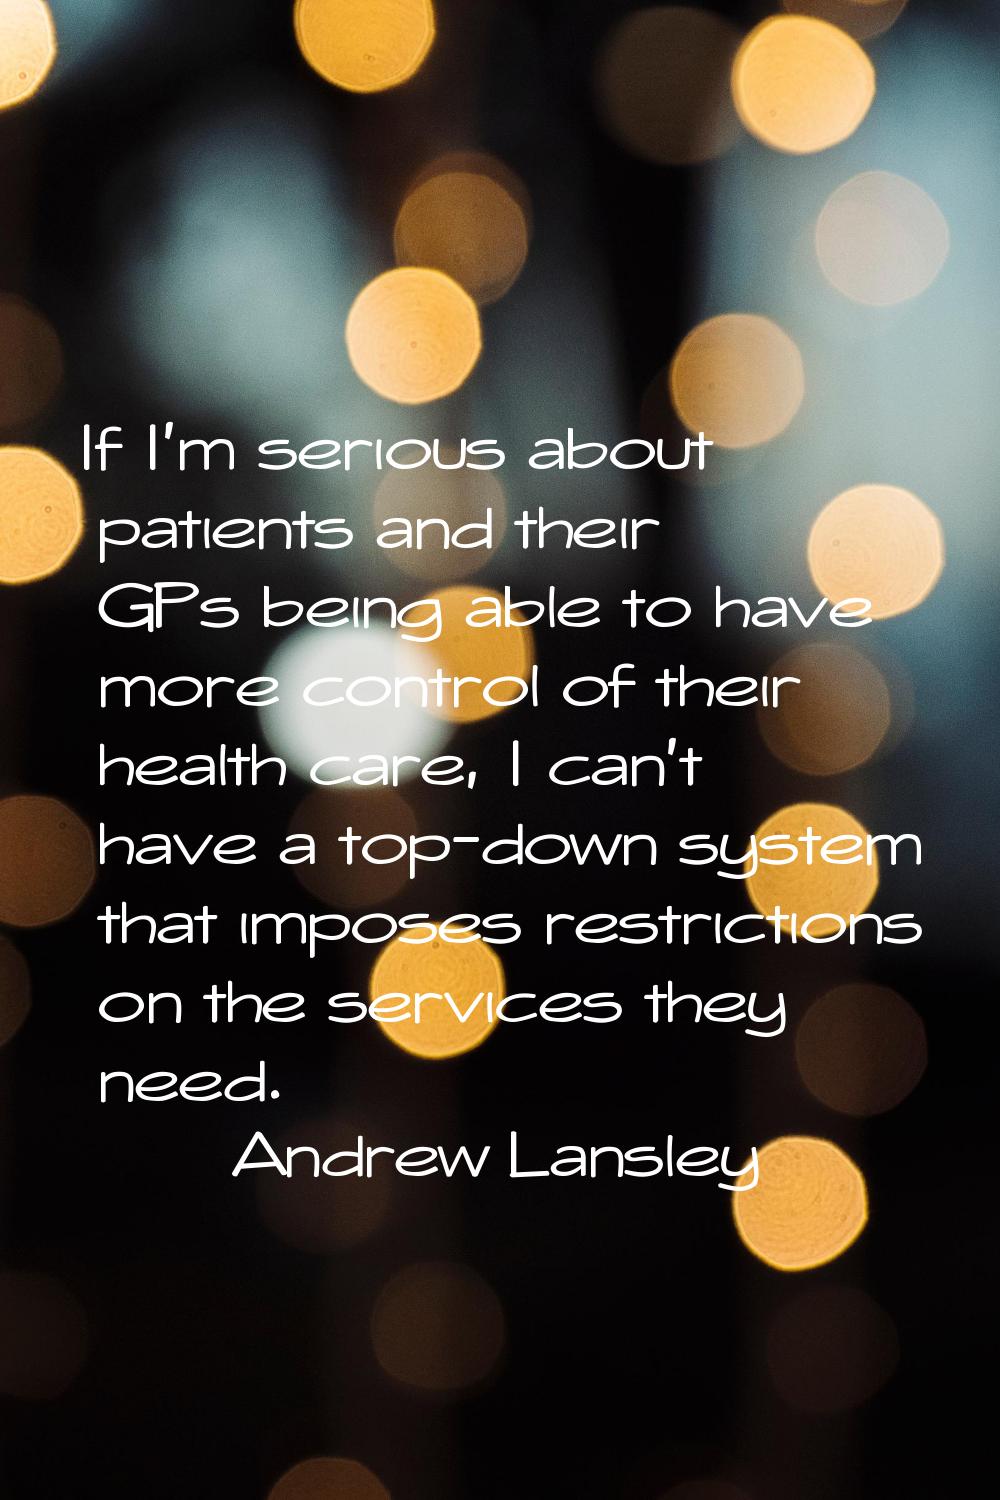 If I'm serious about patients and their GPs being able to have more control of their health care, I